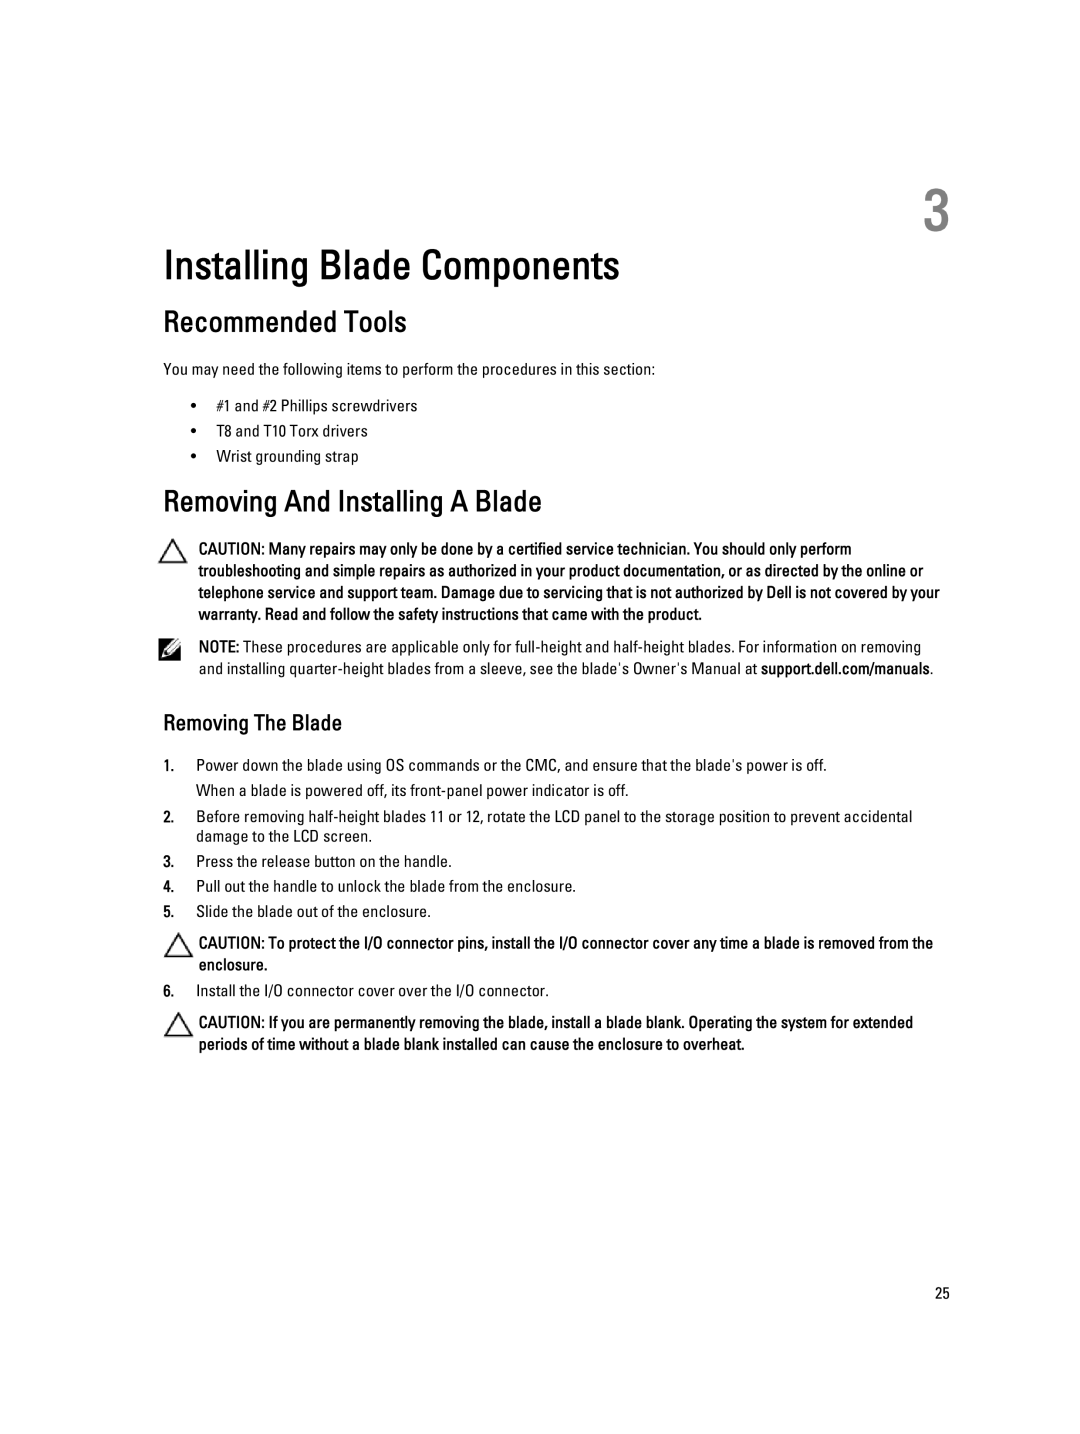 Dell M620 owner manual Recommended Tools, Removing And Installing a Blade, Removing The Blade 